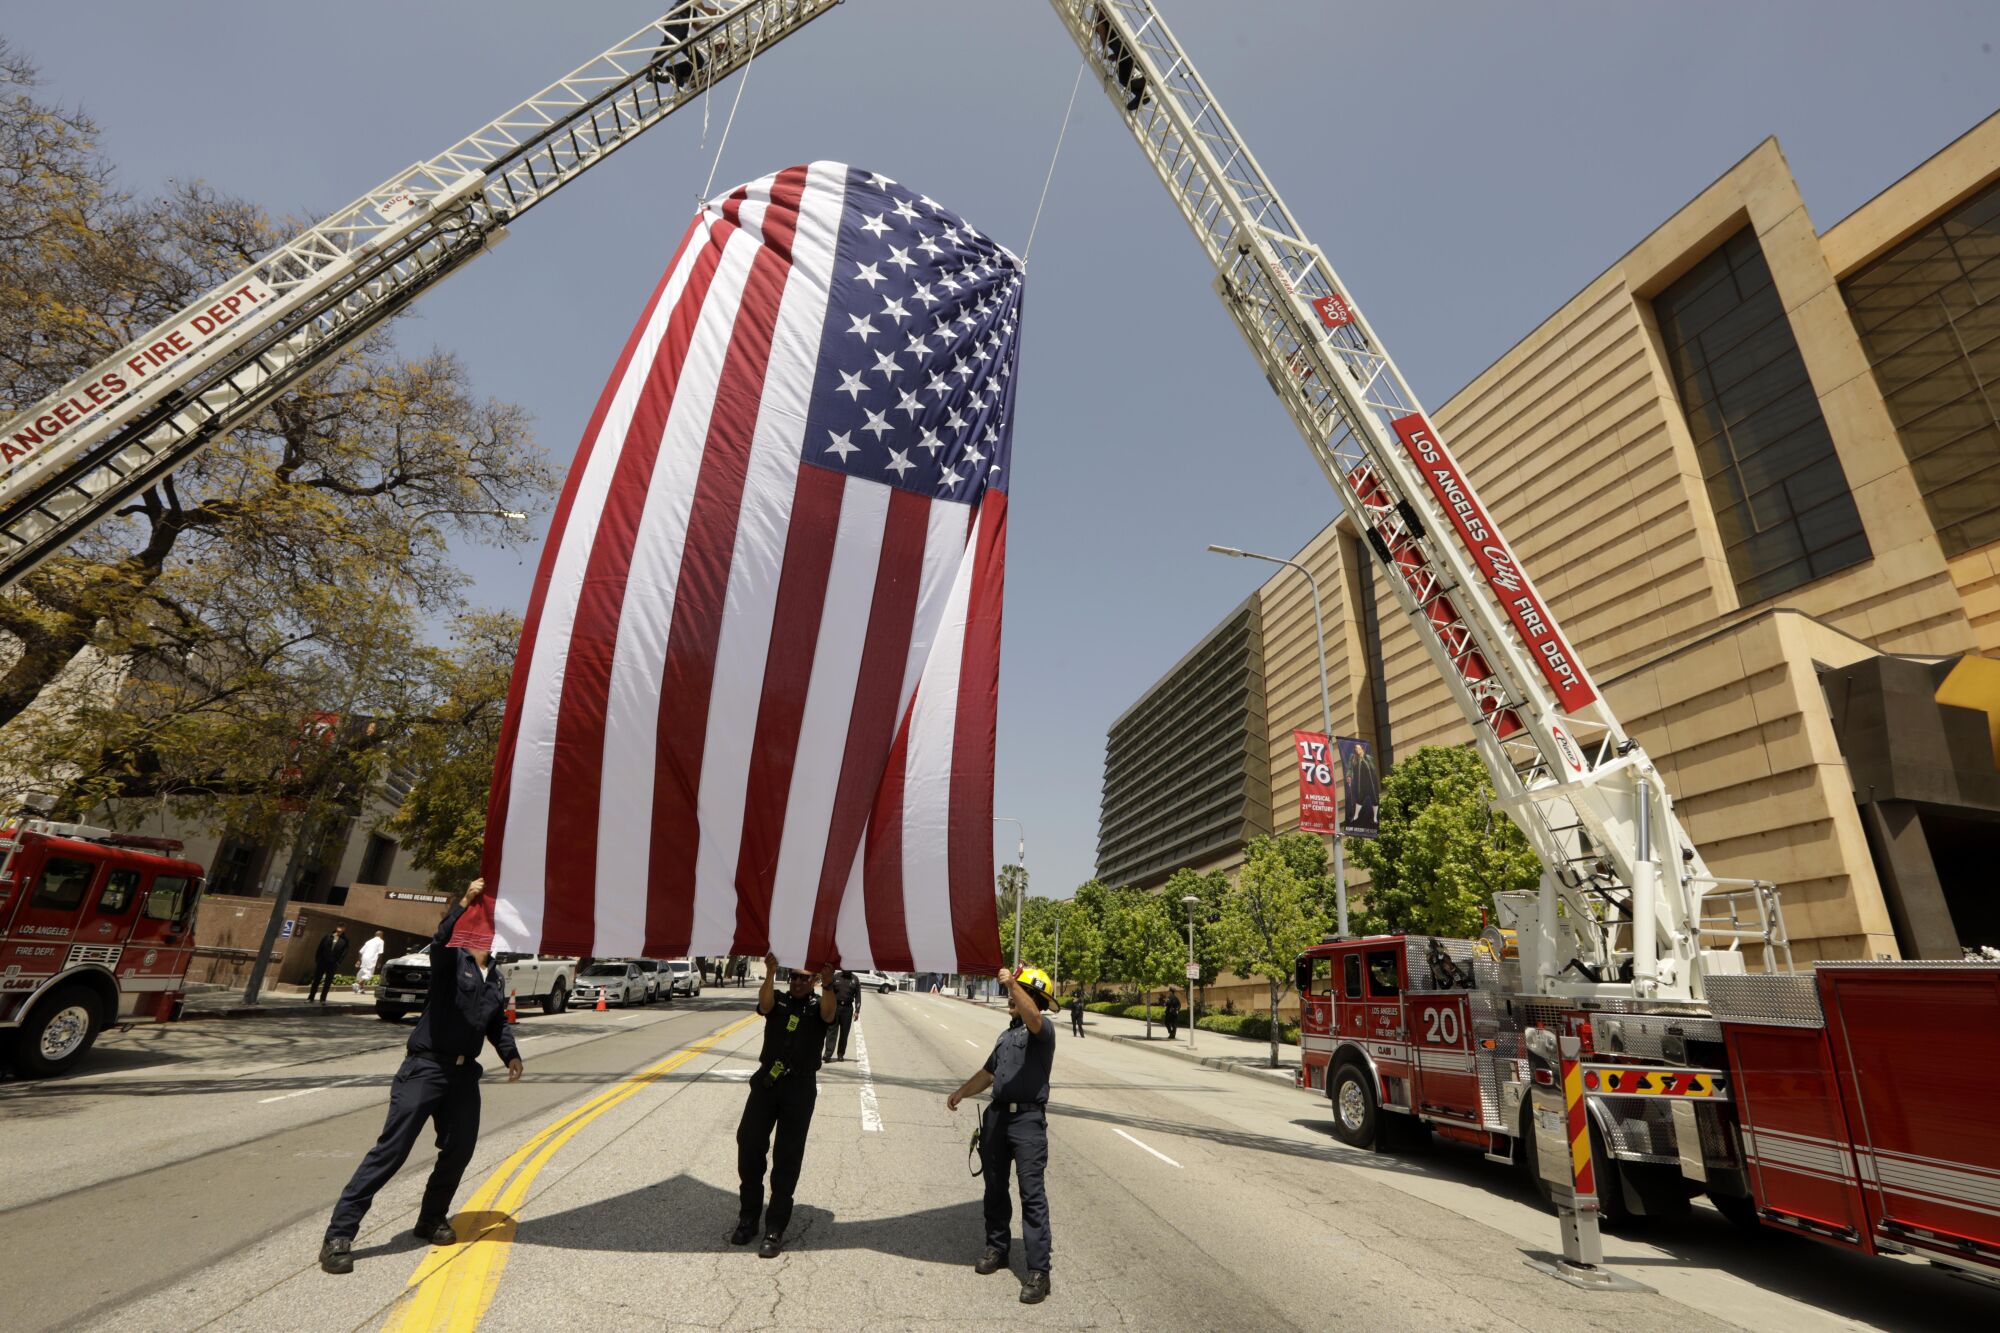 LAFD flies the US flag during a mass celebration commemorating the life of former Los Angeles Mayor Richard Riordan 